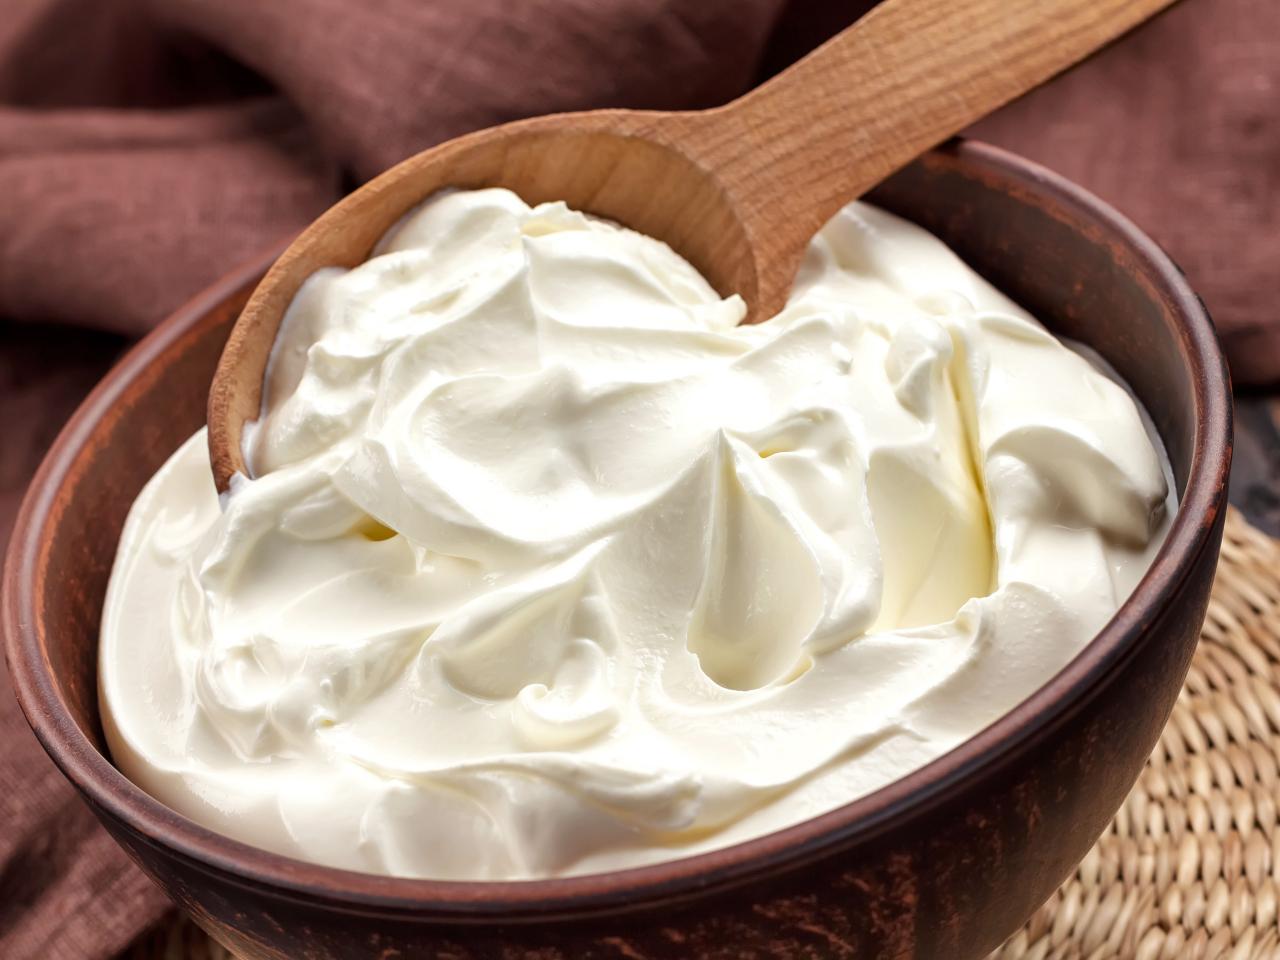 How to Make Real Cultured Crème Fraiche at Home